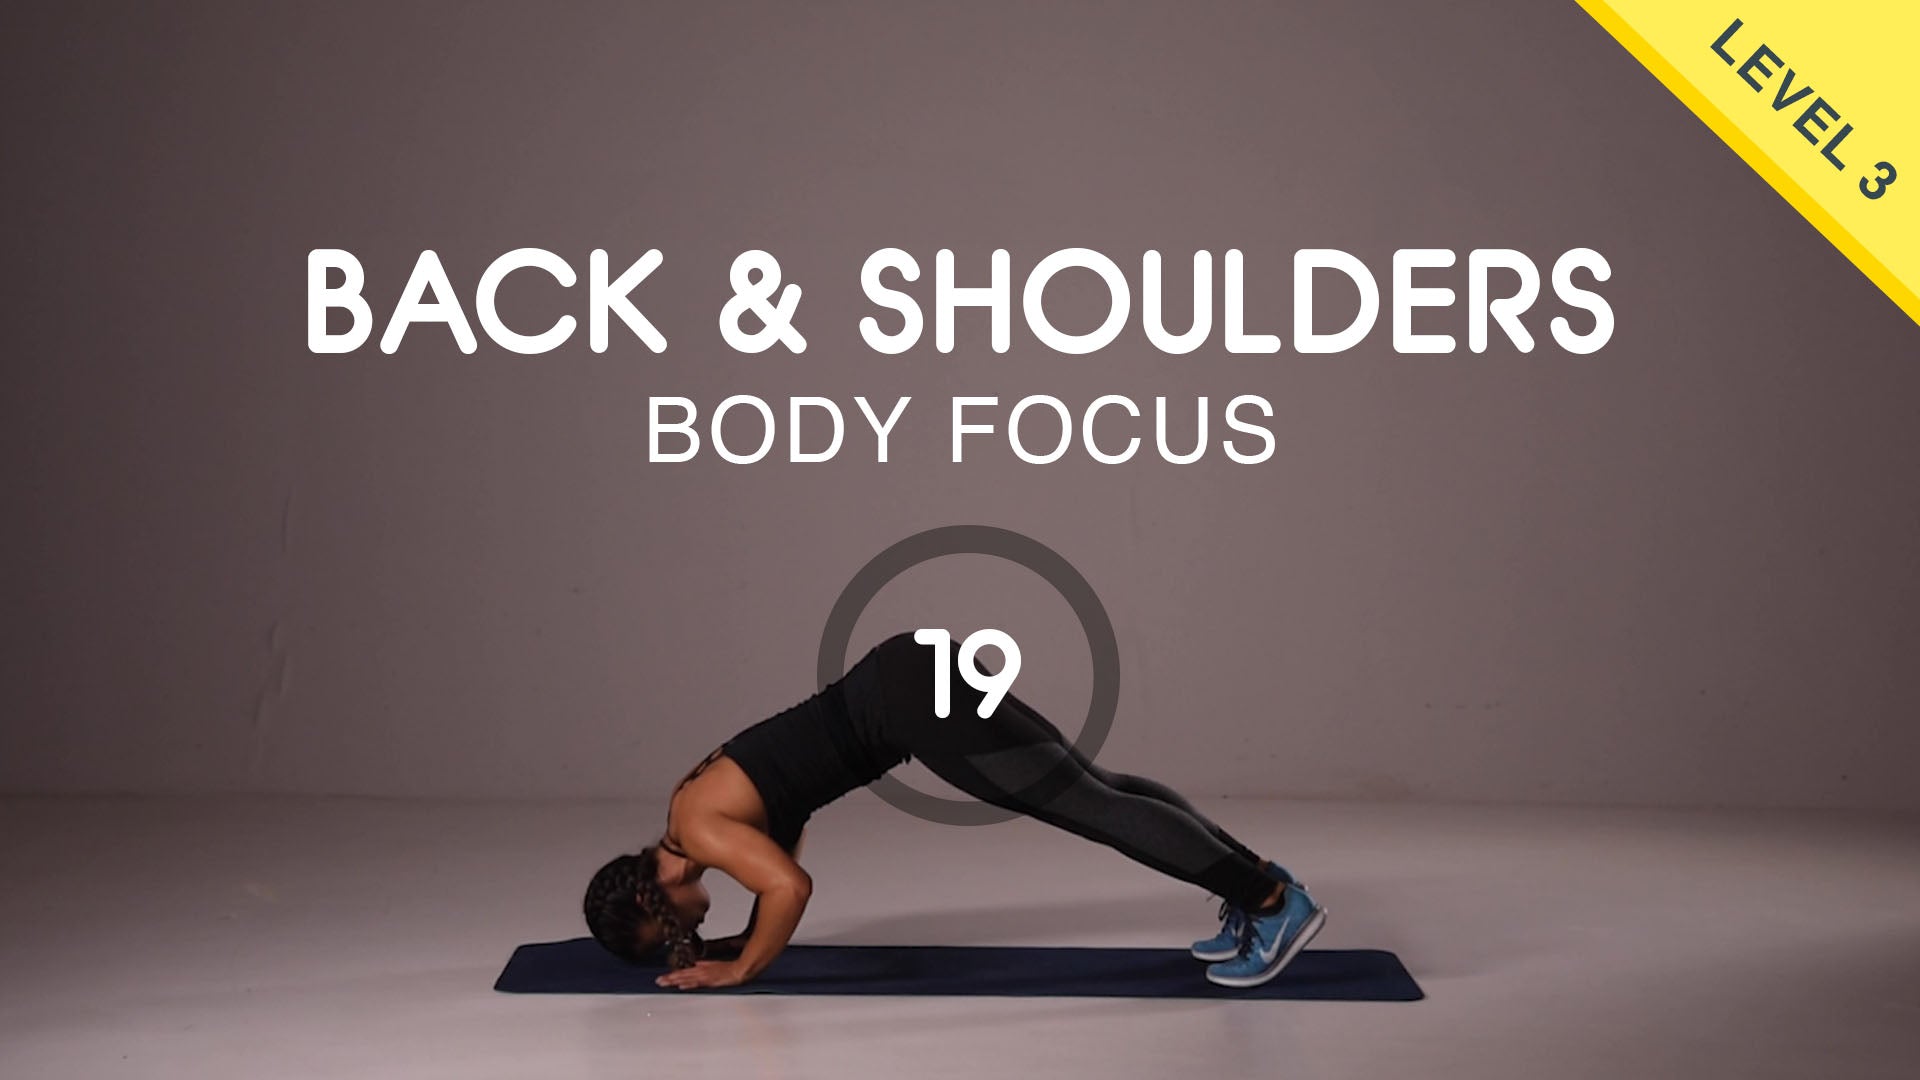 15 min INTENSE SLIDER WORKOUT, Abs, Booty and Legs